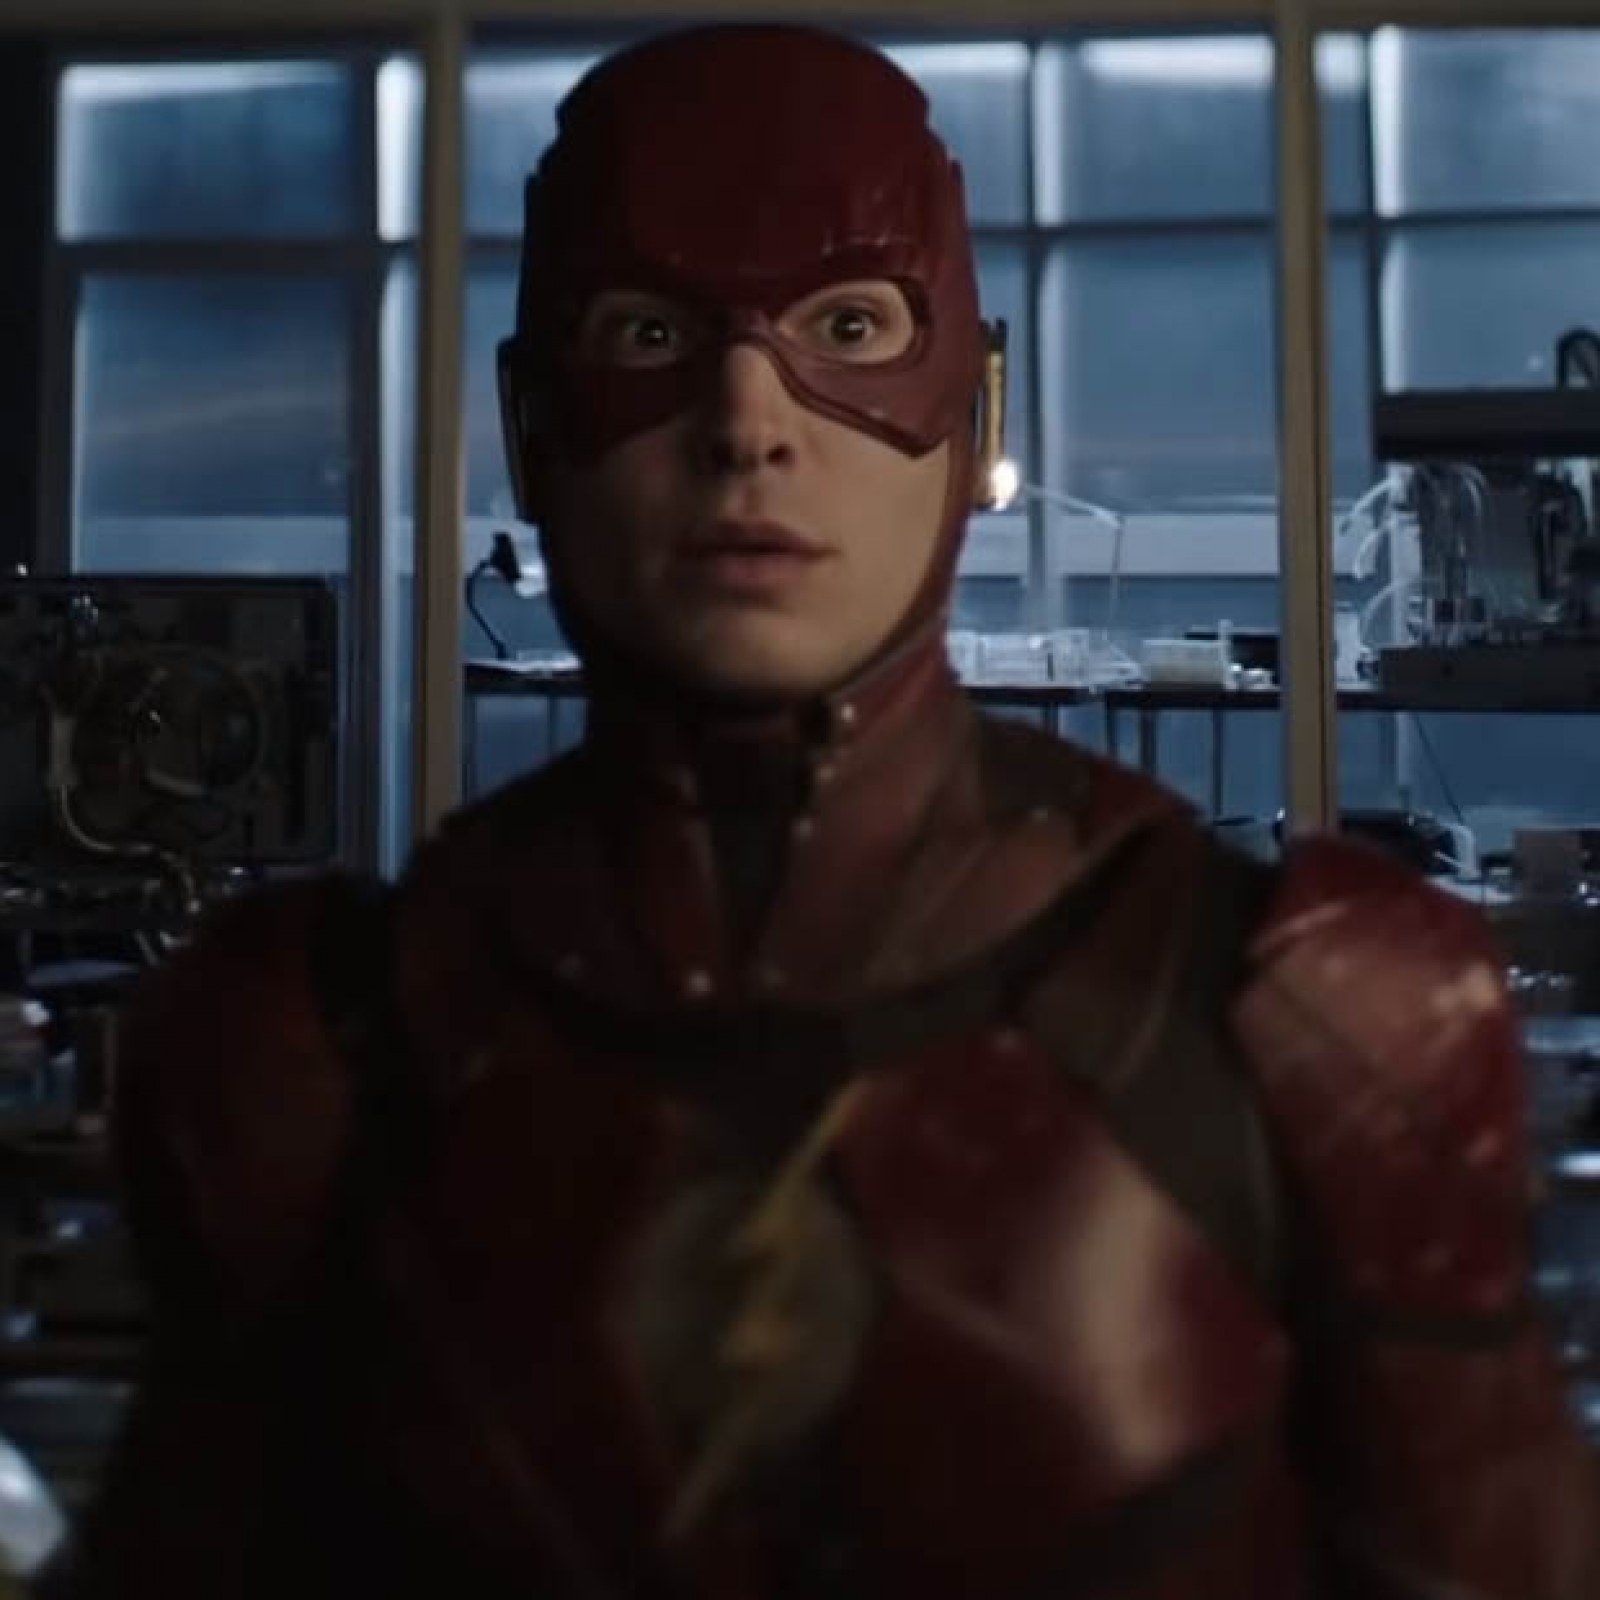 Crisis on Infinite Earths': What the Ezra Miller Cameo Means for the Arrowverse and DCEU